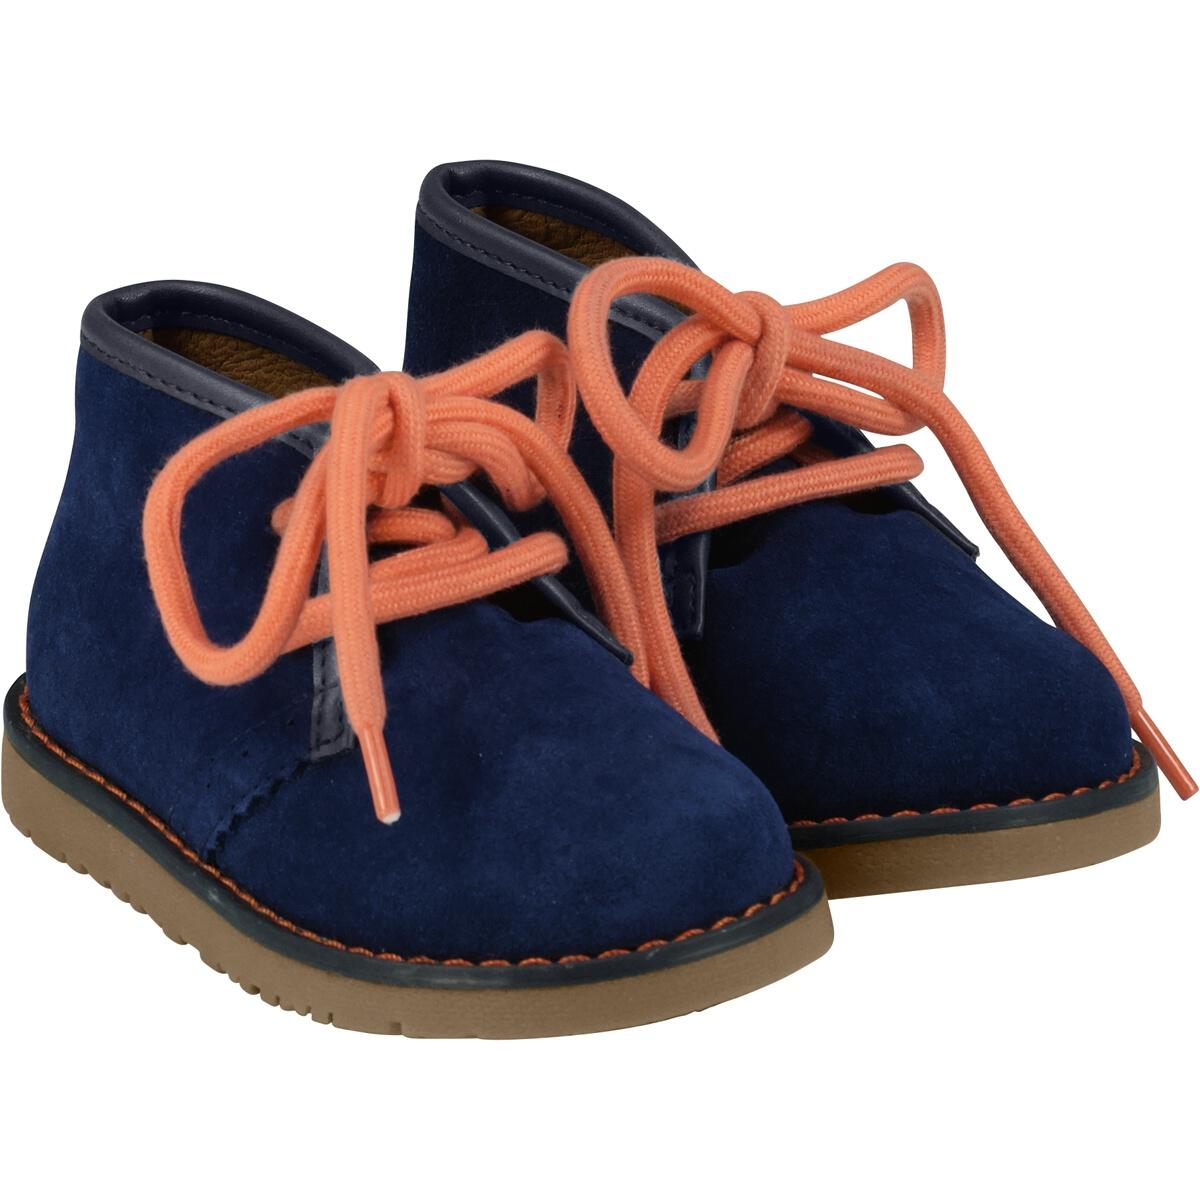 carnaby blue suede shoes